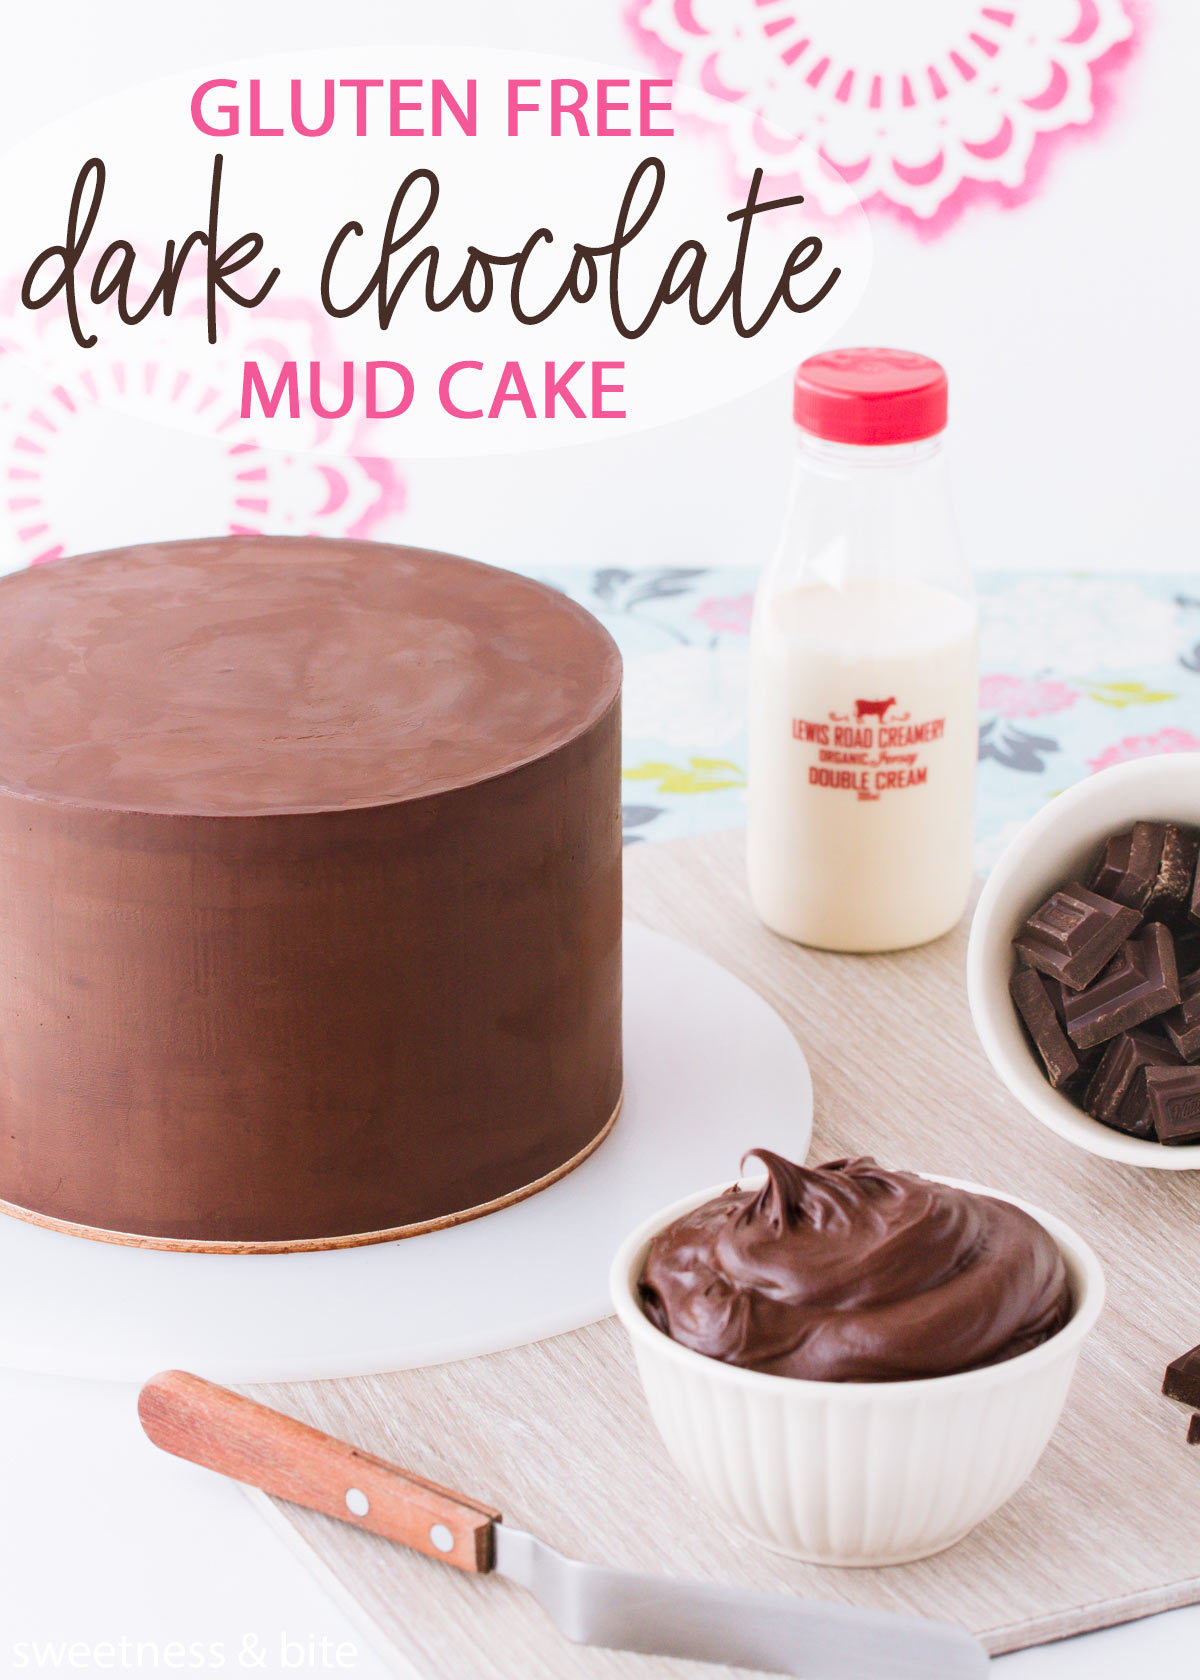 A moist, dense, gluten free dark chocolate mud cake. Suitable for covering in fondant, tiered cakes, carved cakes, and decorating using the 3 day timeline.